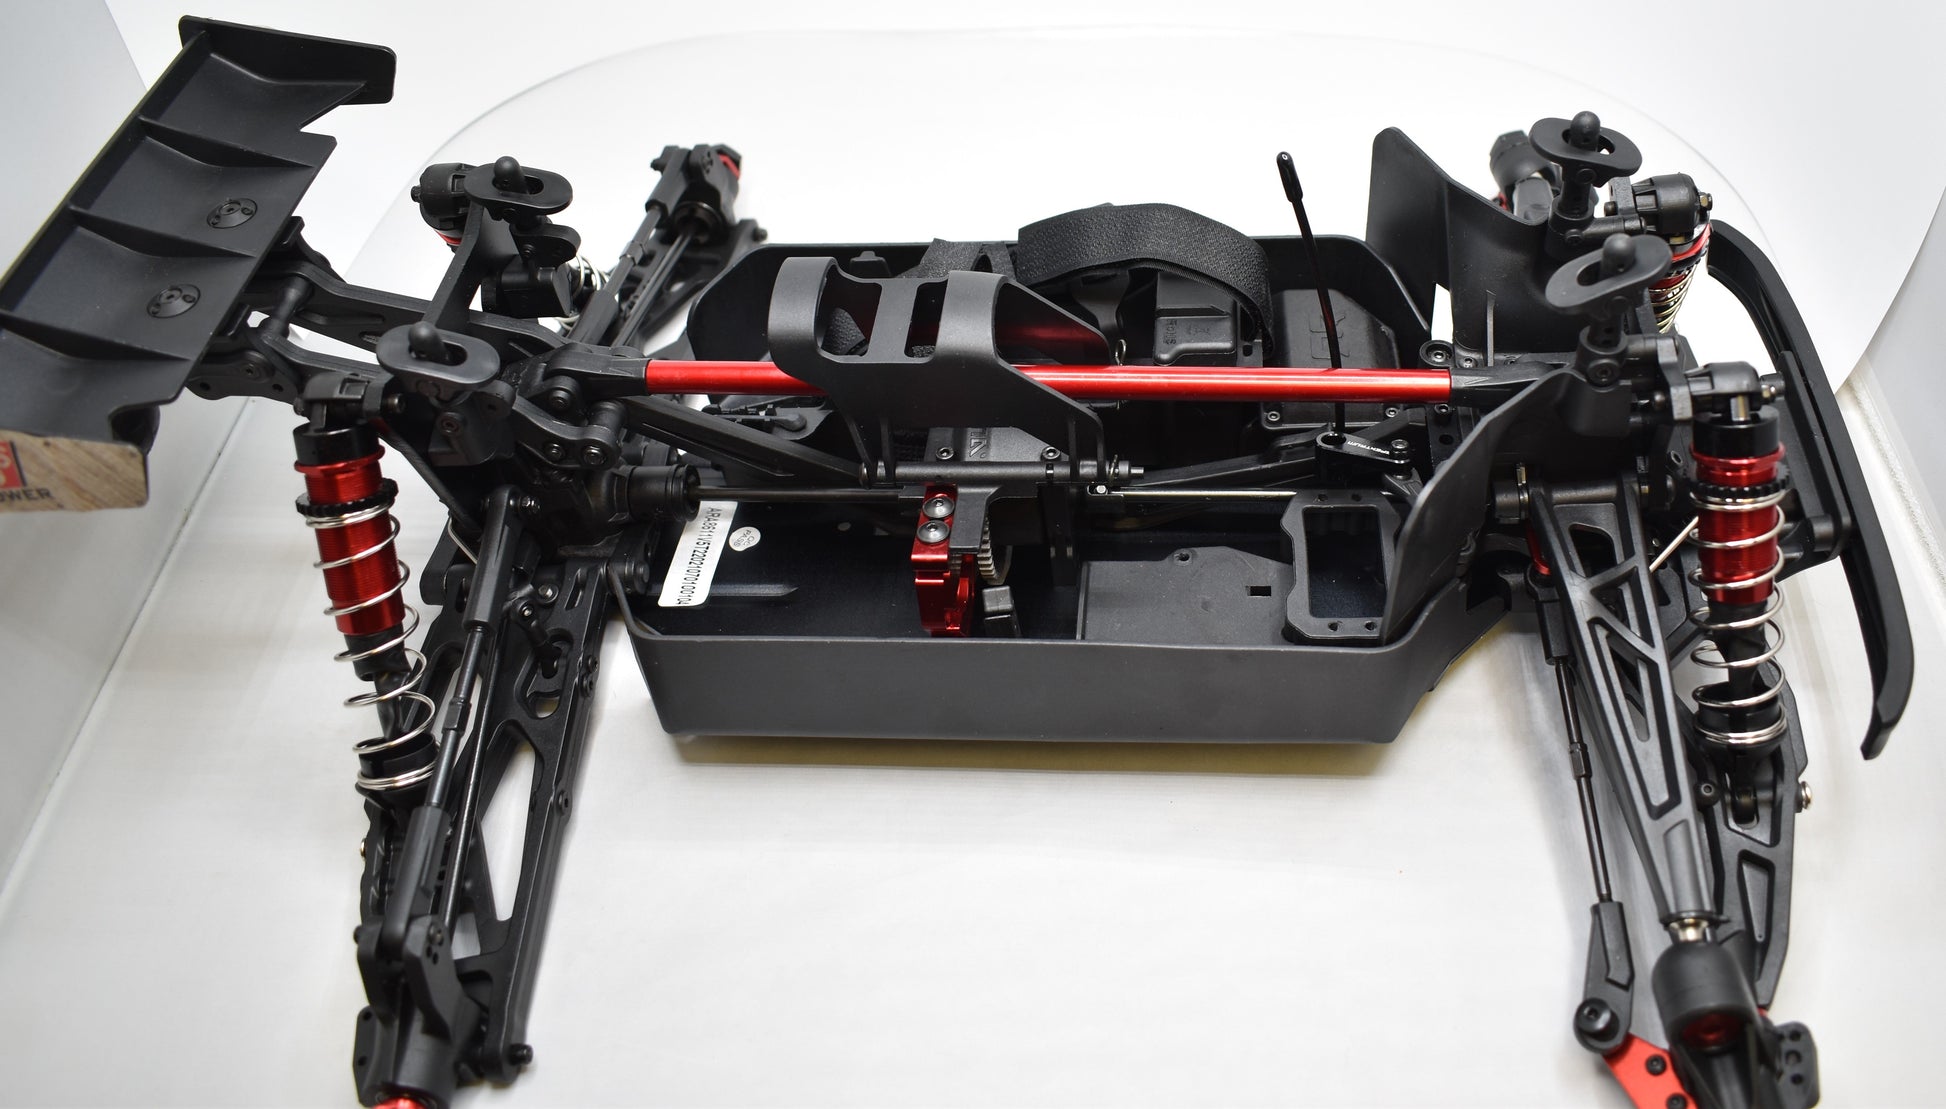 Arrma 1/8 NOTORIOUS 6S 4WD BLX Stunt Truck Roller Slider Chassis - Dirt Cheap RC SAVING YOU MONEY, ONE PART AT A TIME